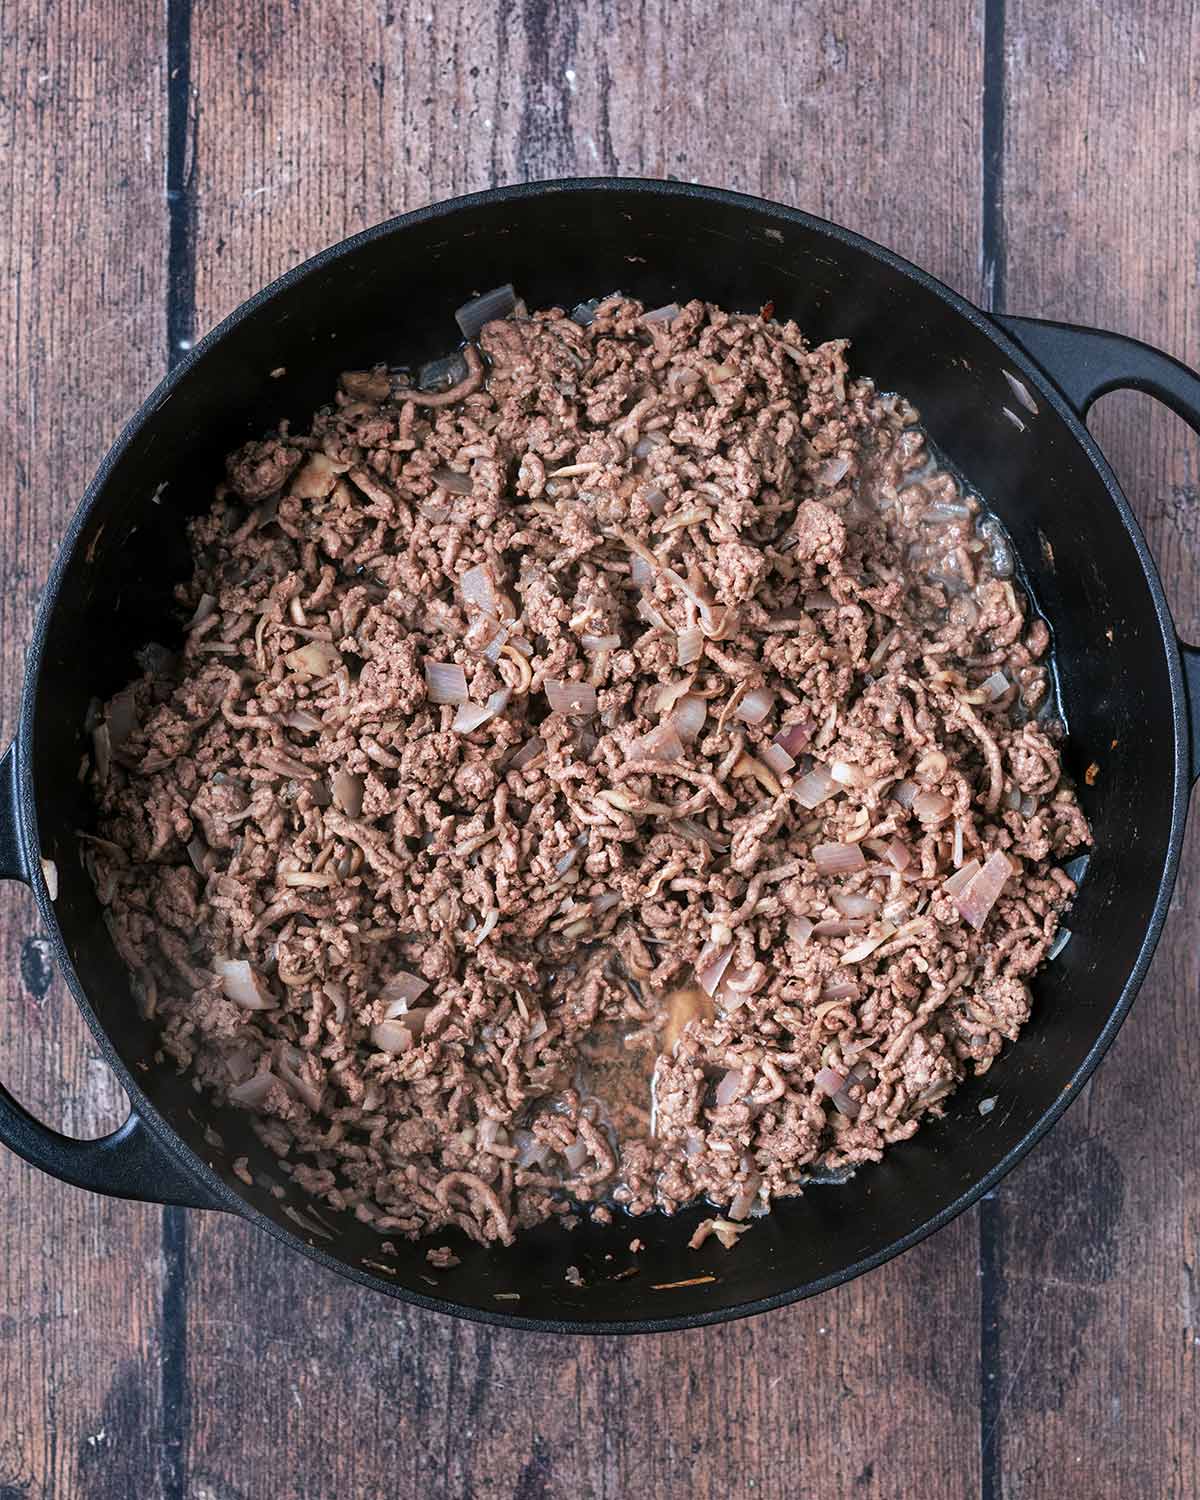 Minced beef added to the pan.